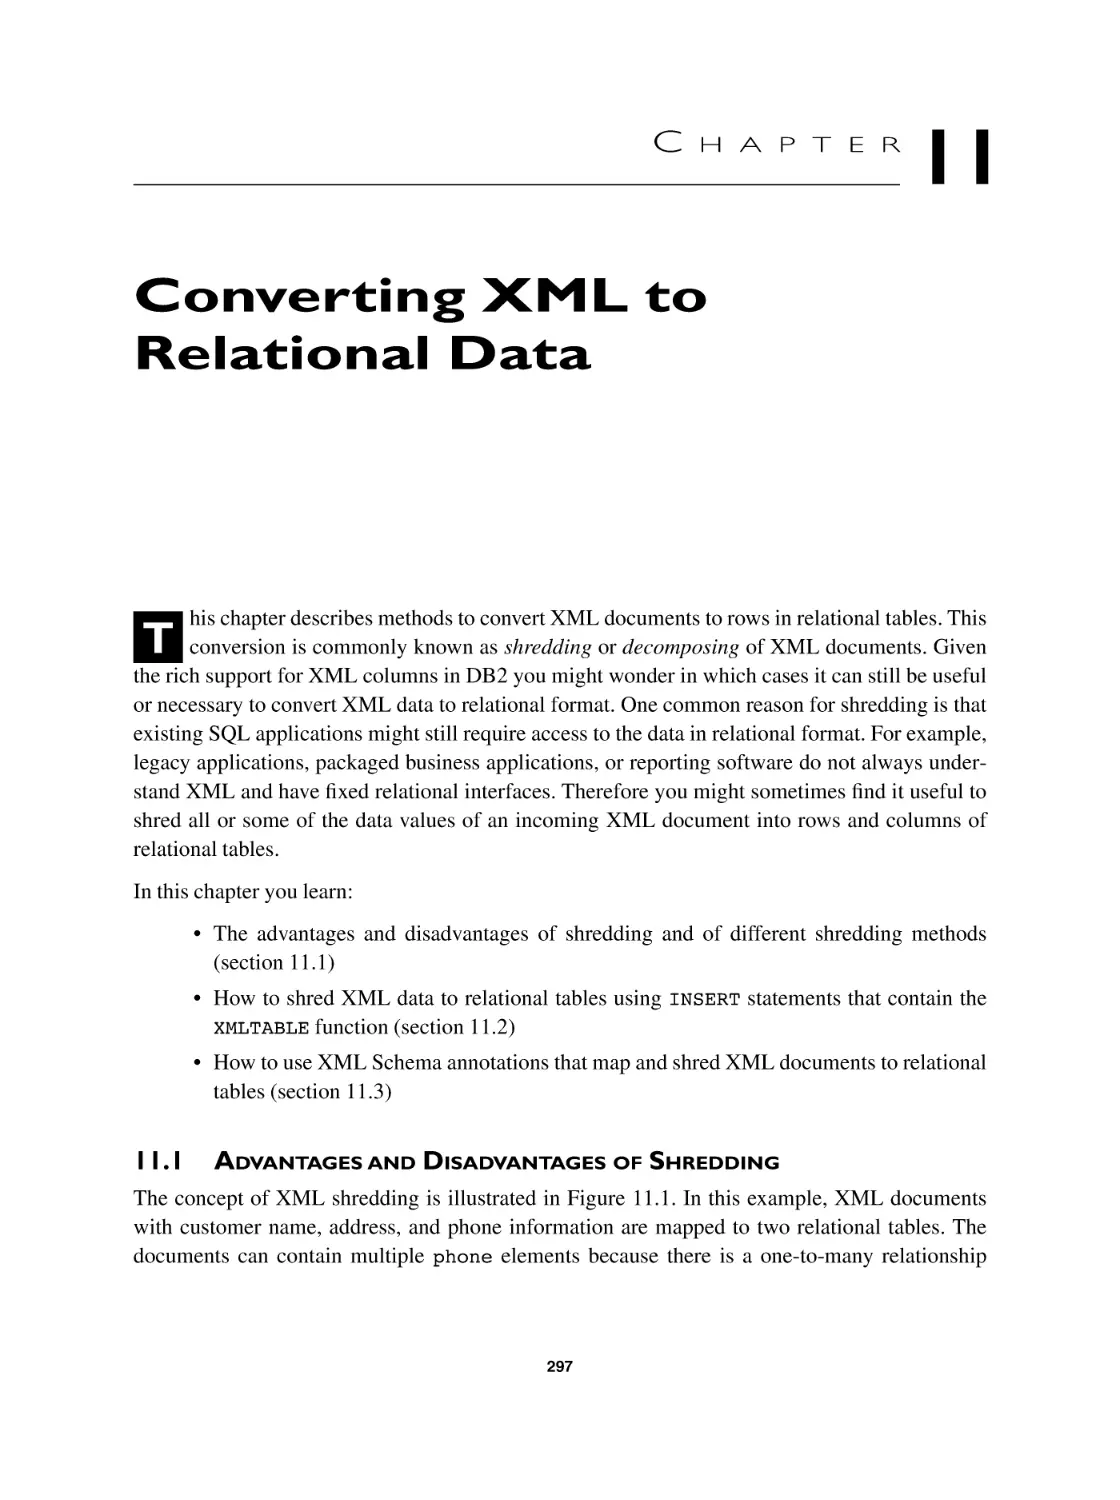 Chapter 11 Converting XML to Relational Data
11.1 Advantages and Disadvantages of Shredding